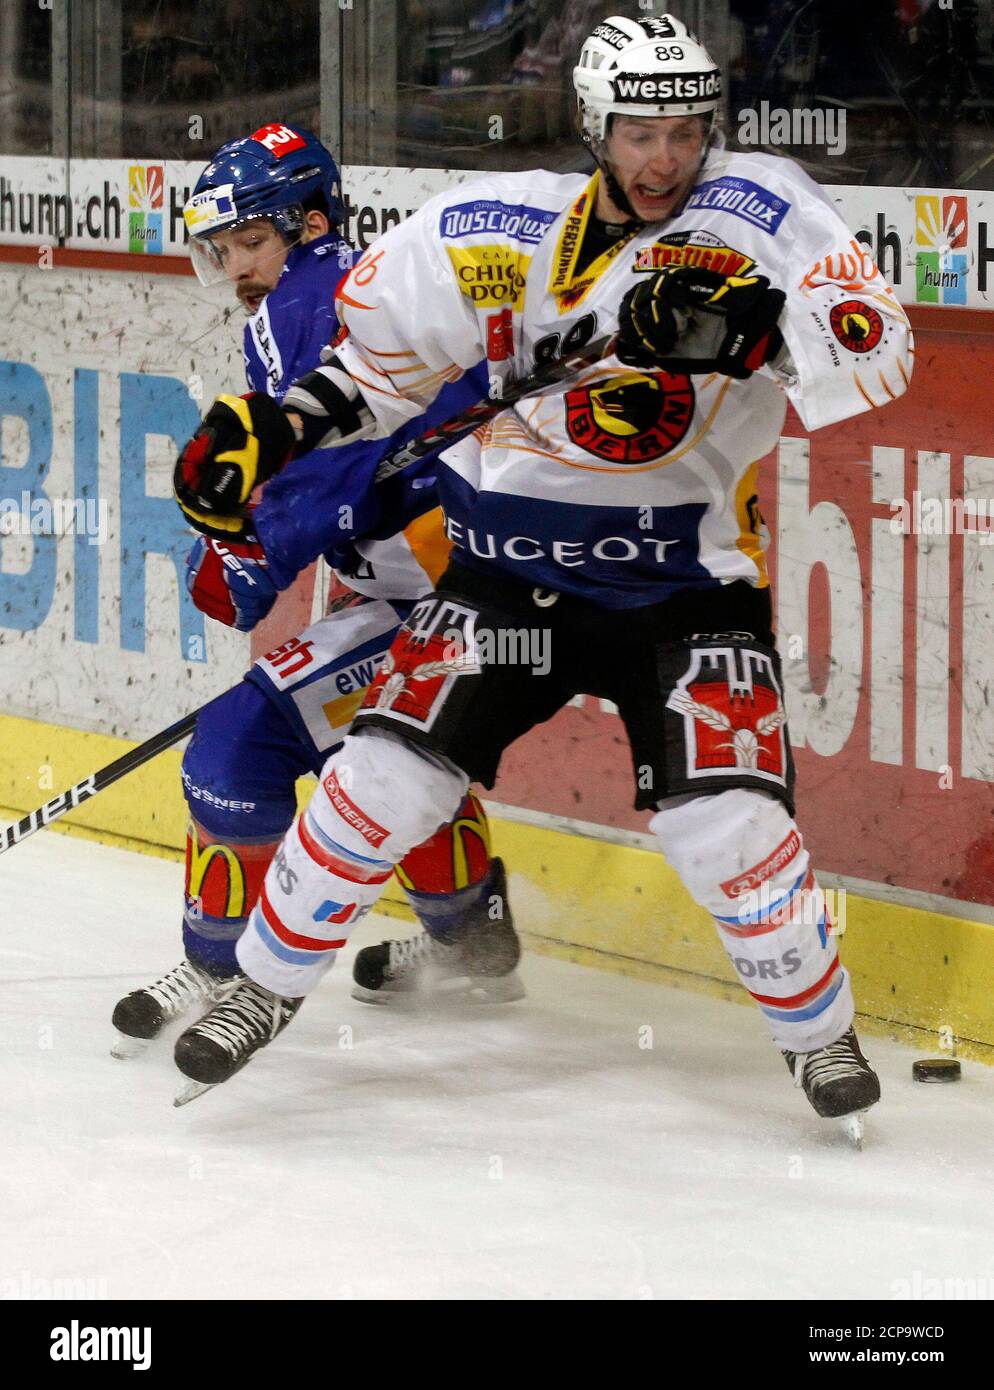 ZSC Lions' Patrick Geering (L) challenges SC Bern's (SCB) Pascal Berger during their Swiss ice hockey play-off final at the Hallenstadion arena in Zurich April 14, 2012. REUTERS/Arnd Wiegmann (SWITZERLAND - Tags: SPORT ICE HOCKEY) Stock Photo